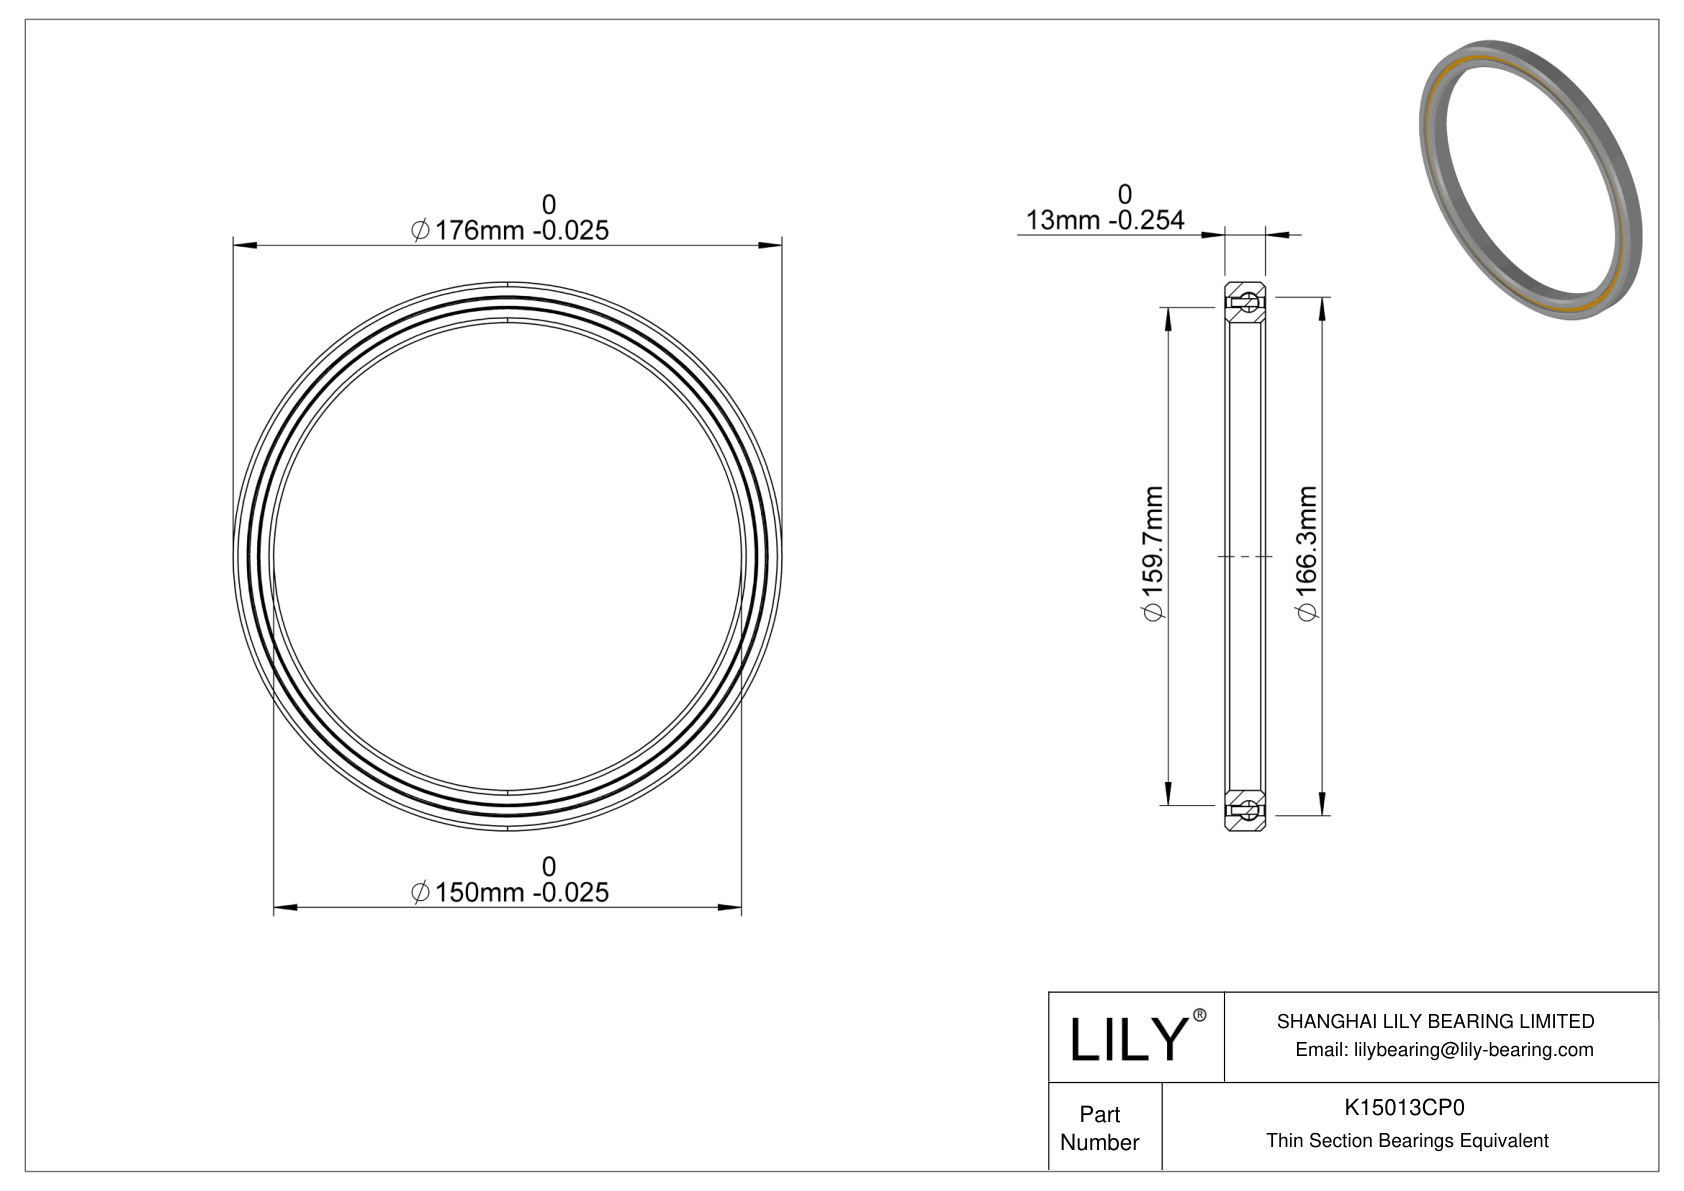 K15013CP0 Constant Section (CS) Bearings cad drawing